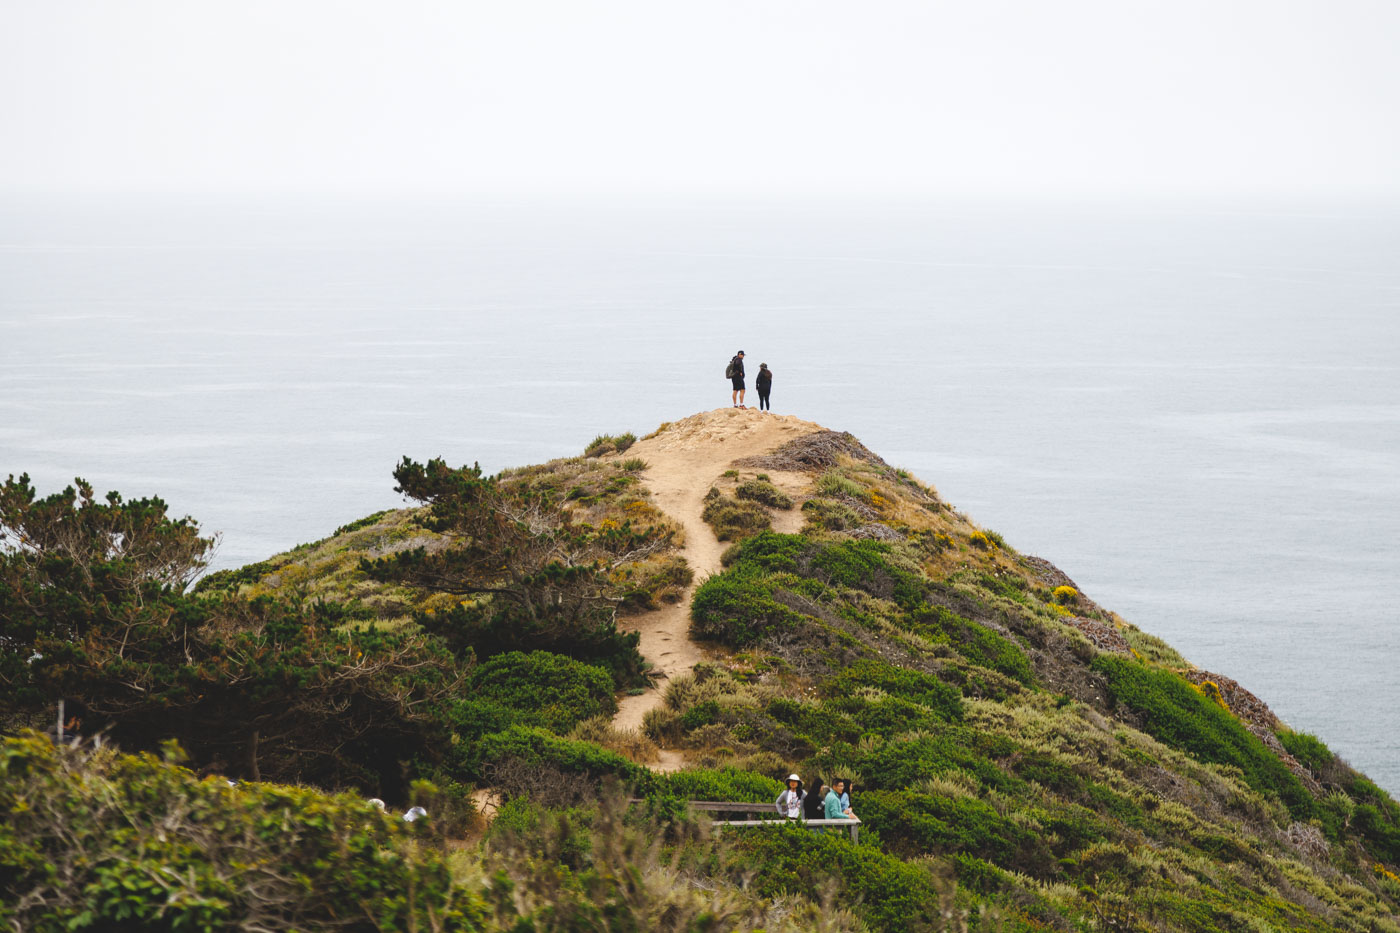 A couple standing on the summit of Whales Peak surrounded by bushes and looking out over a view of the pacific ocean.